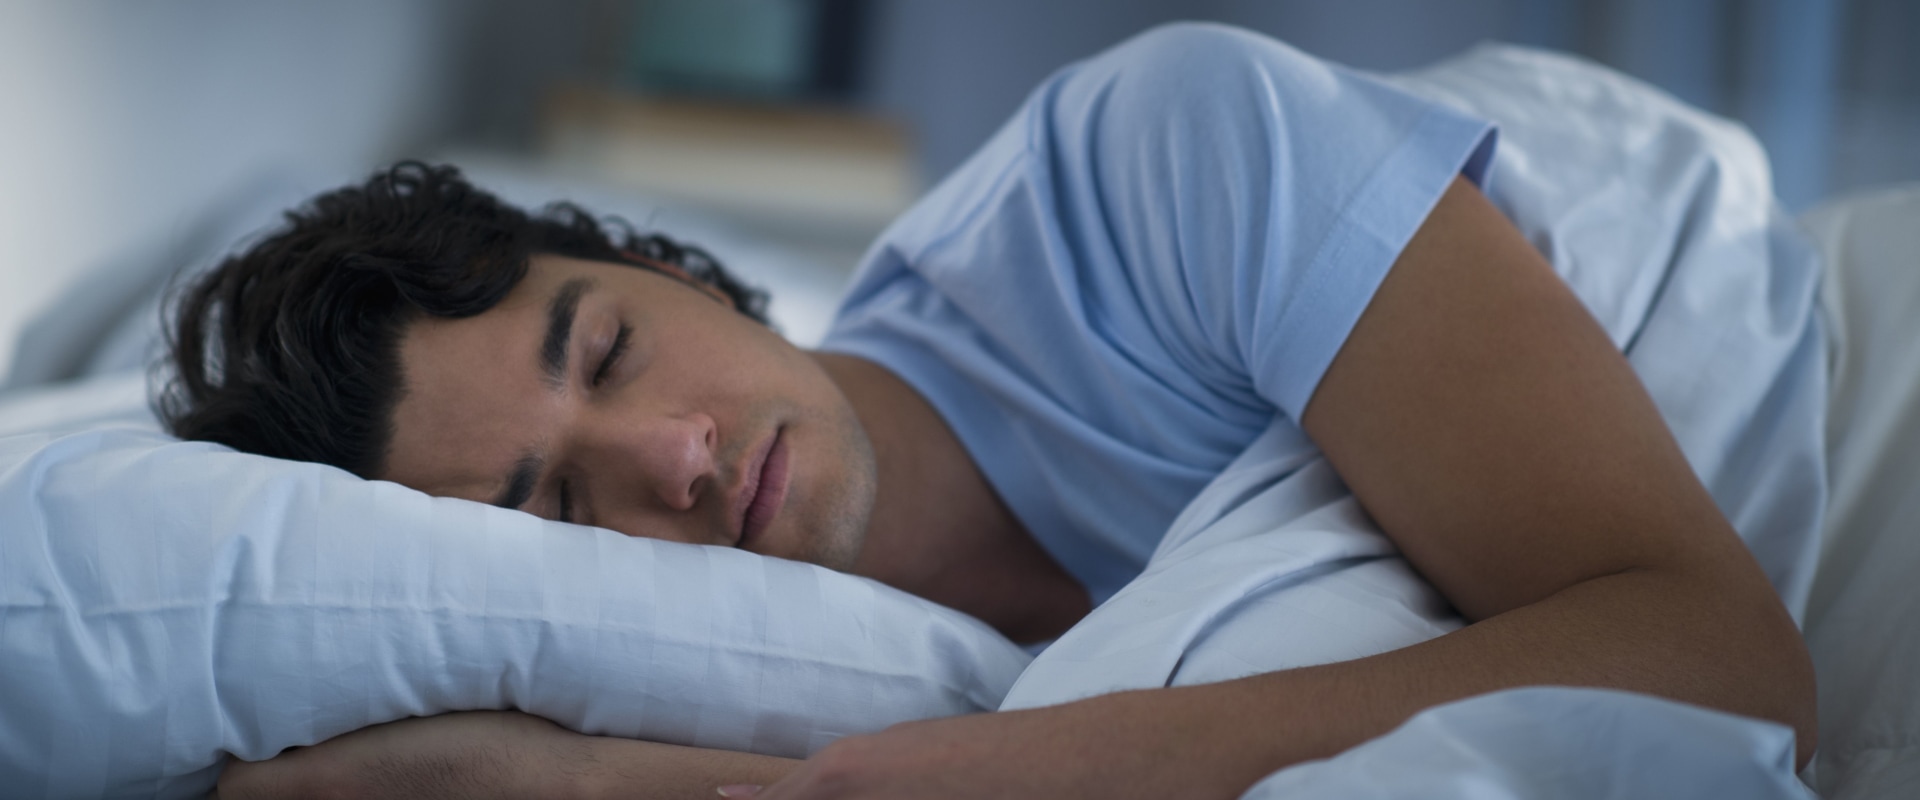 How to Get a Good Night's Sleep: Tips for a Restful Slumber